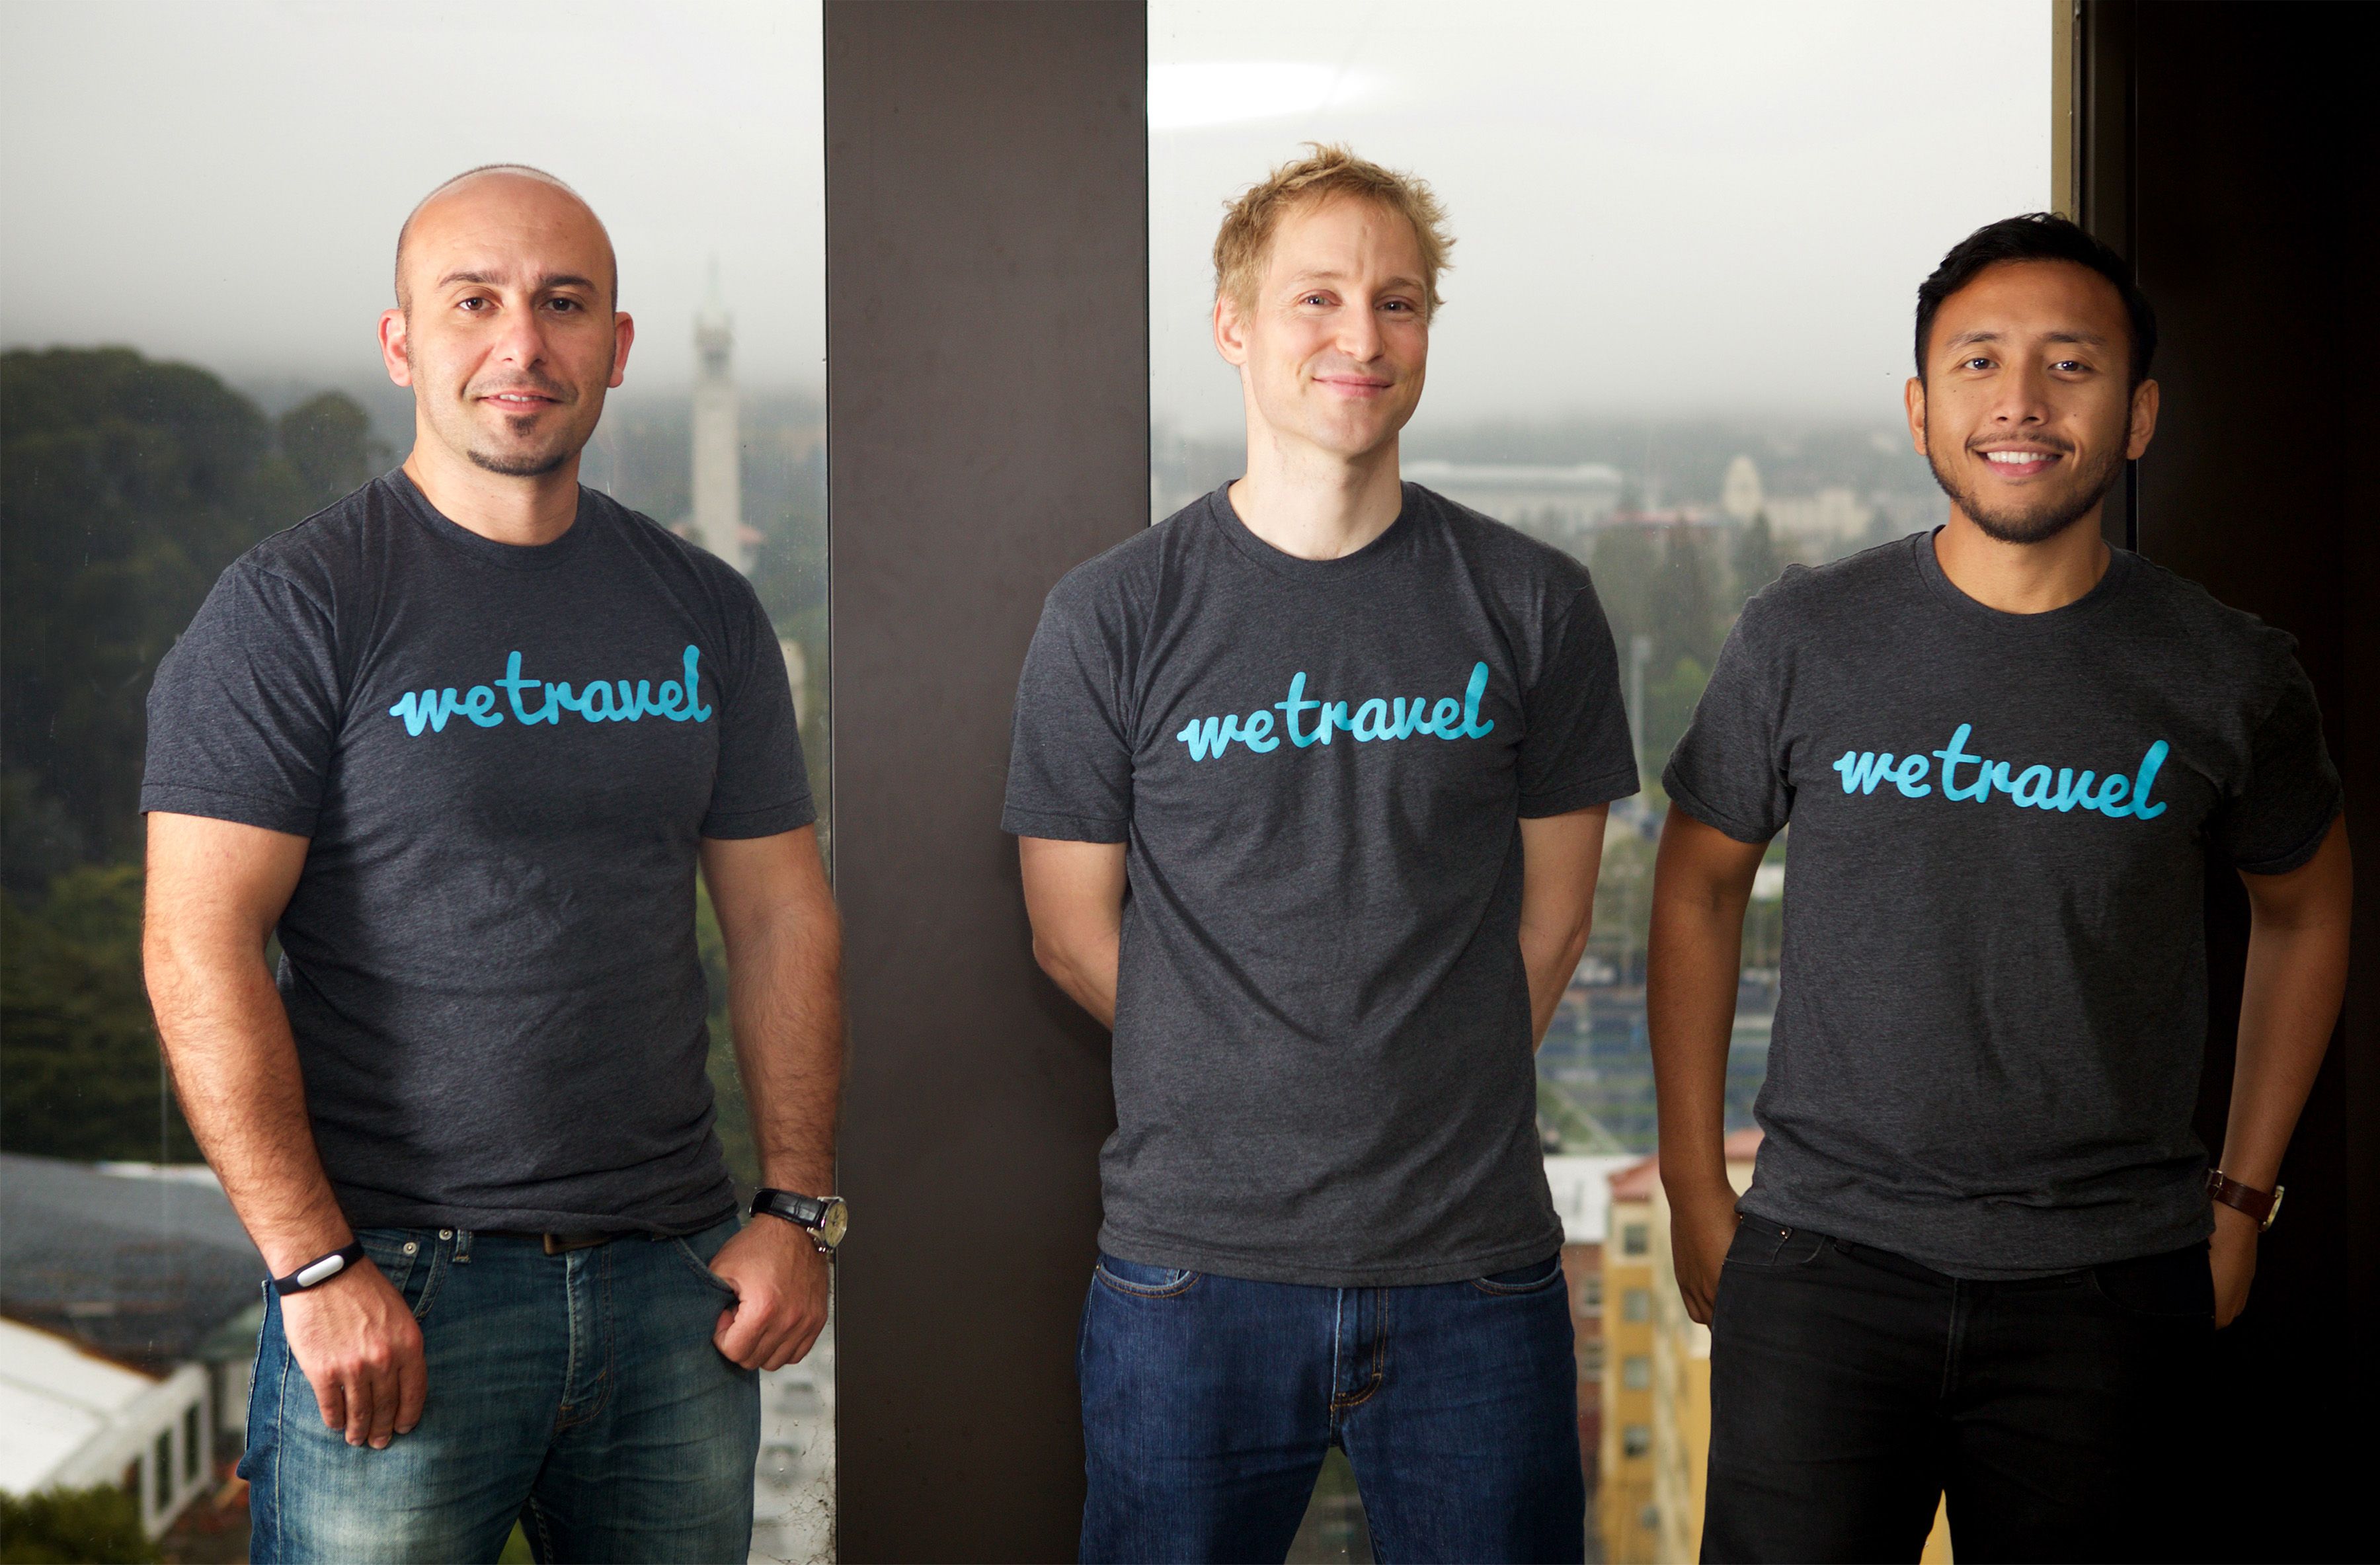 WeTravel co-founders (from left to right) Garib Mehdiyev, Johannes Koeppel, and Zaky Prabowo